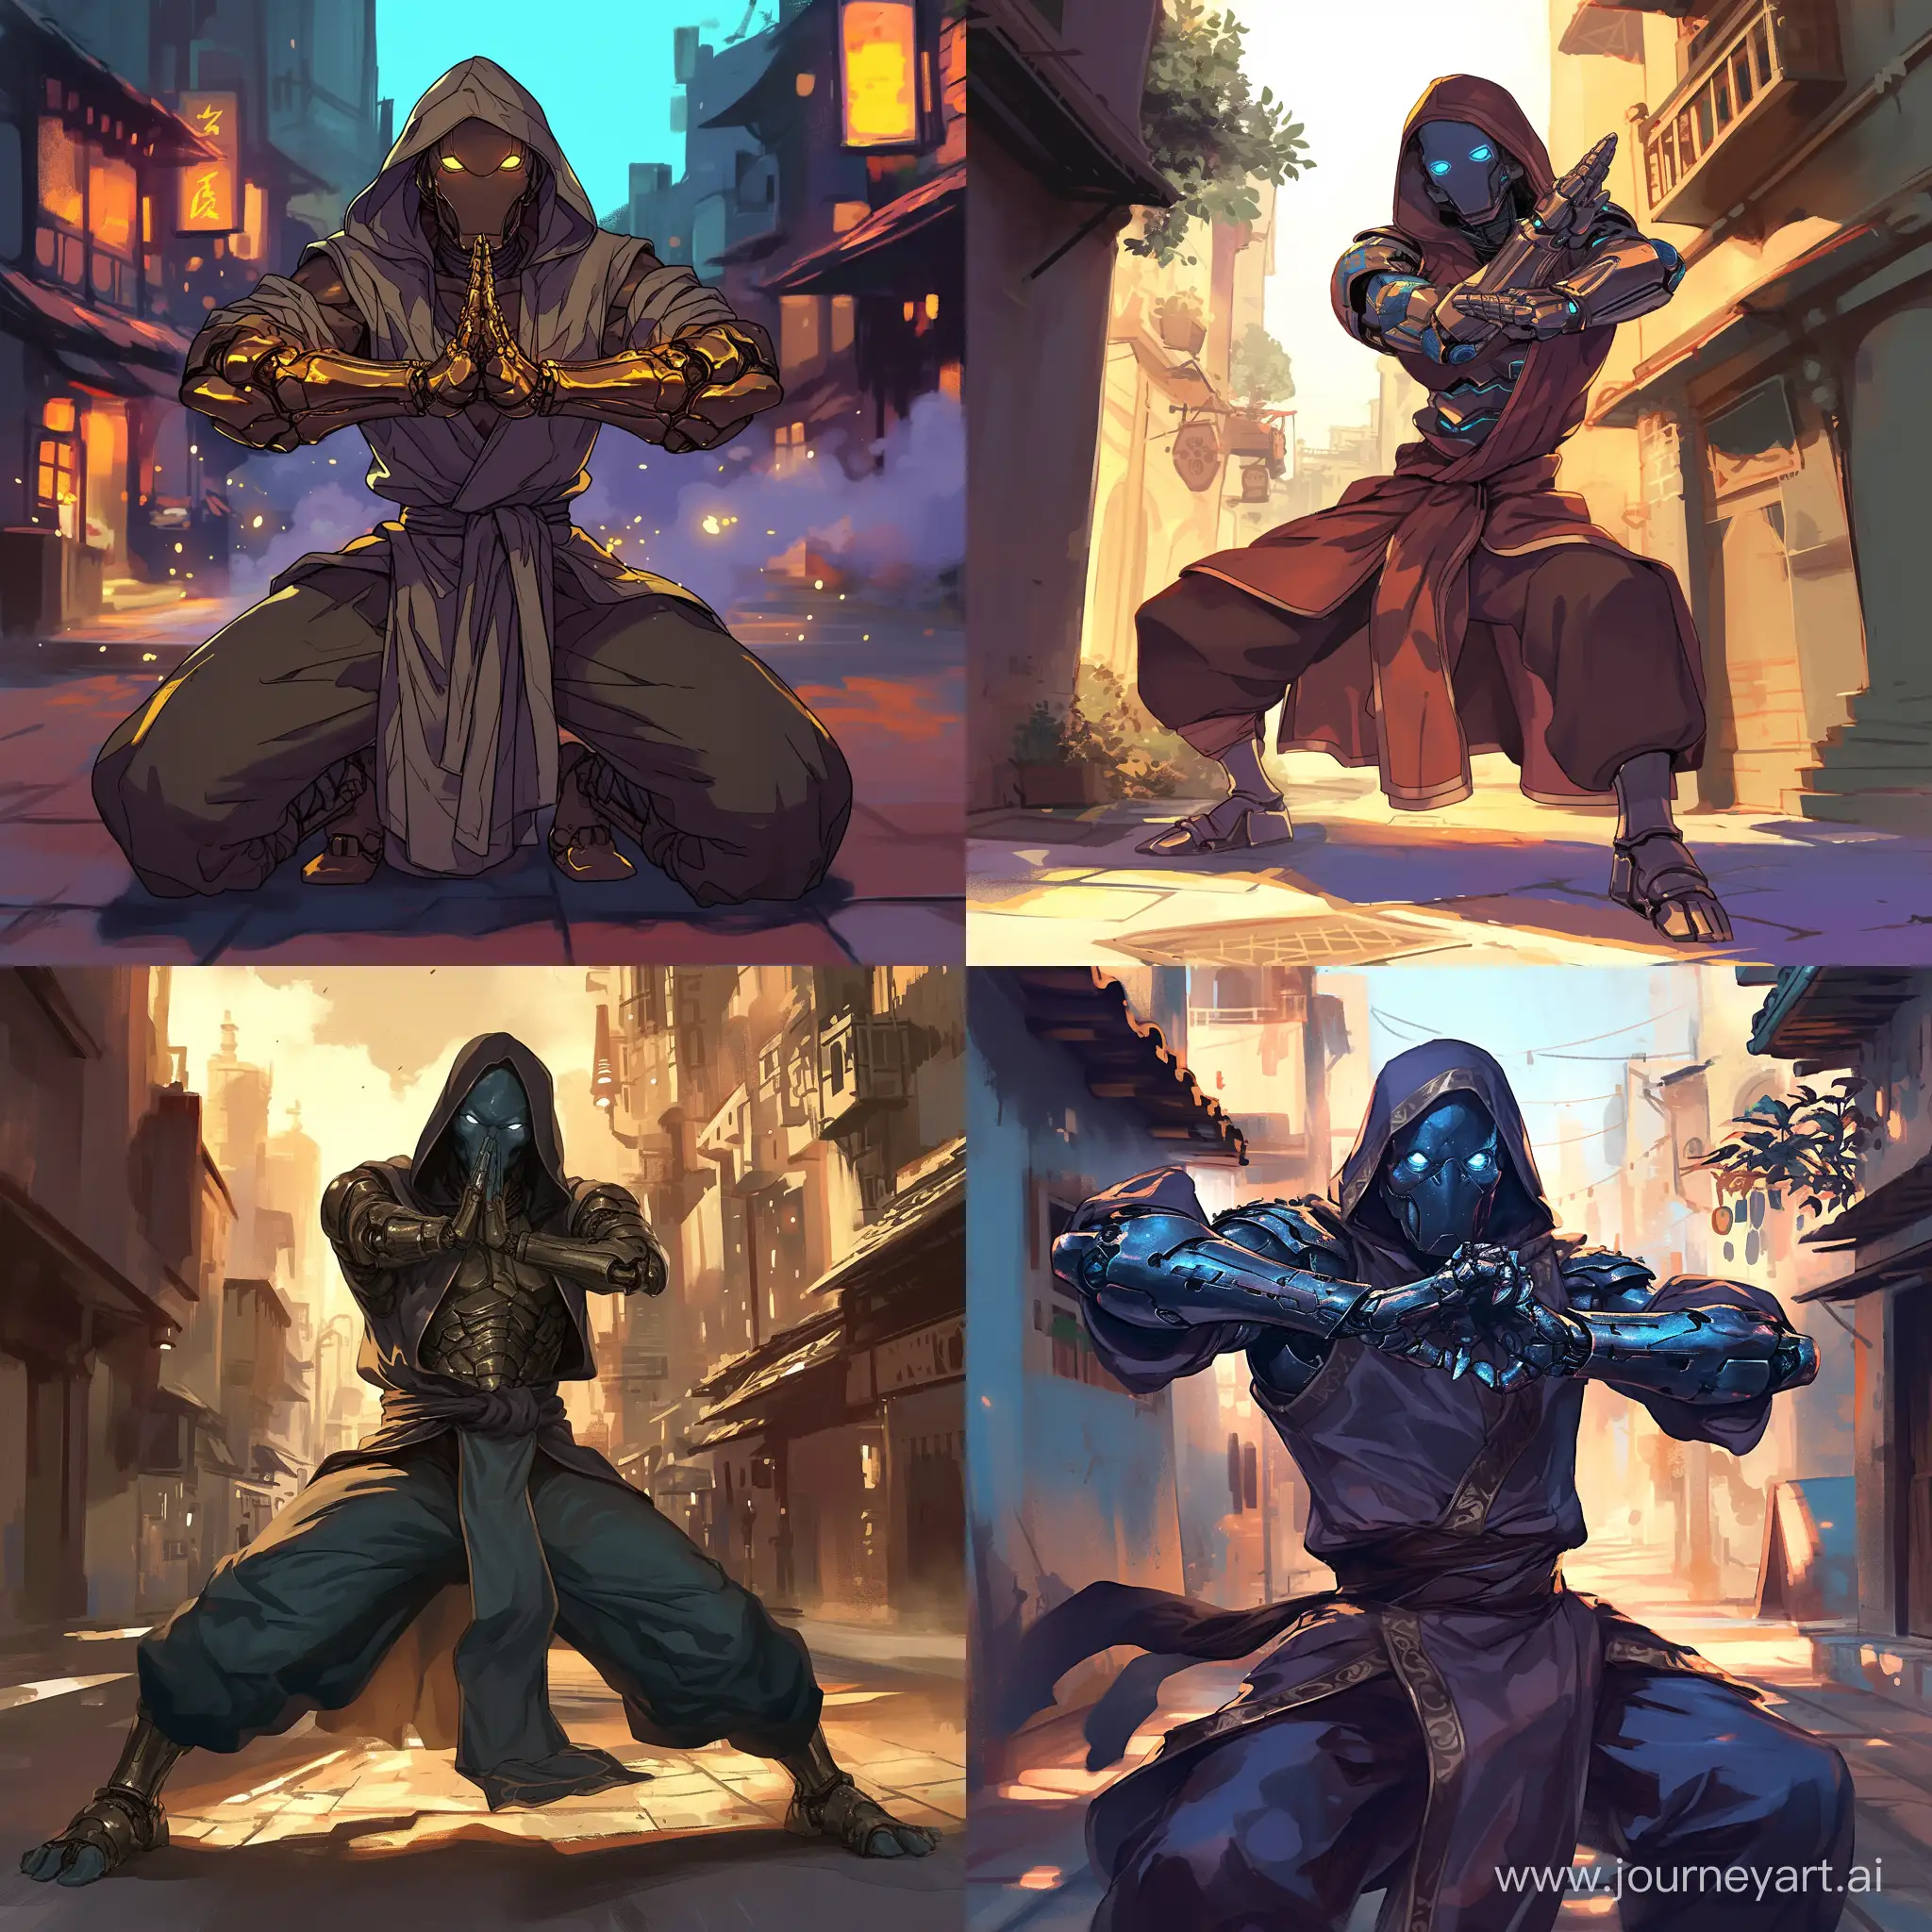 D&D PC, male warforged, slender build, hooded robes, monk, martial arts stance, standing in a city street --niji 6